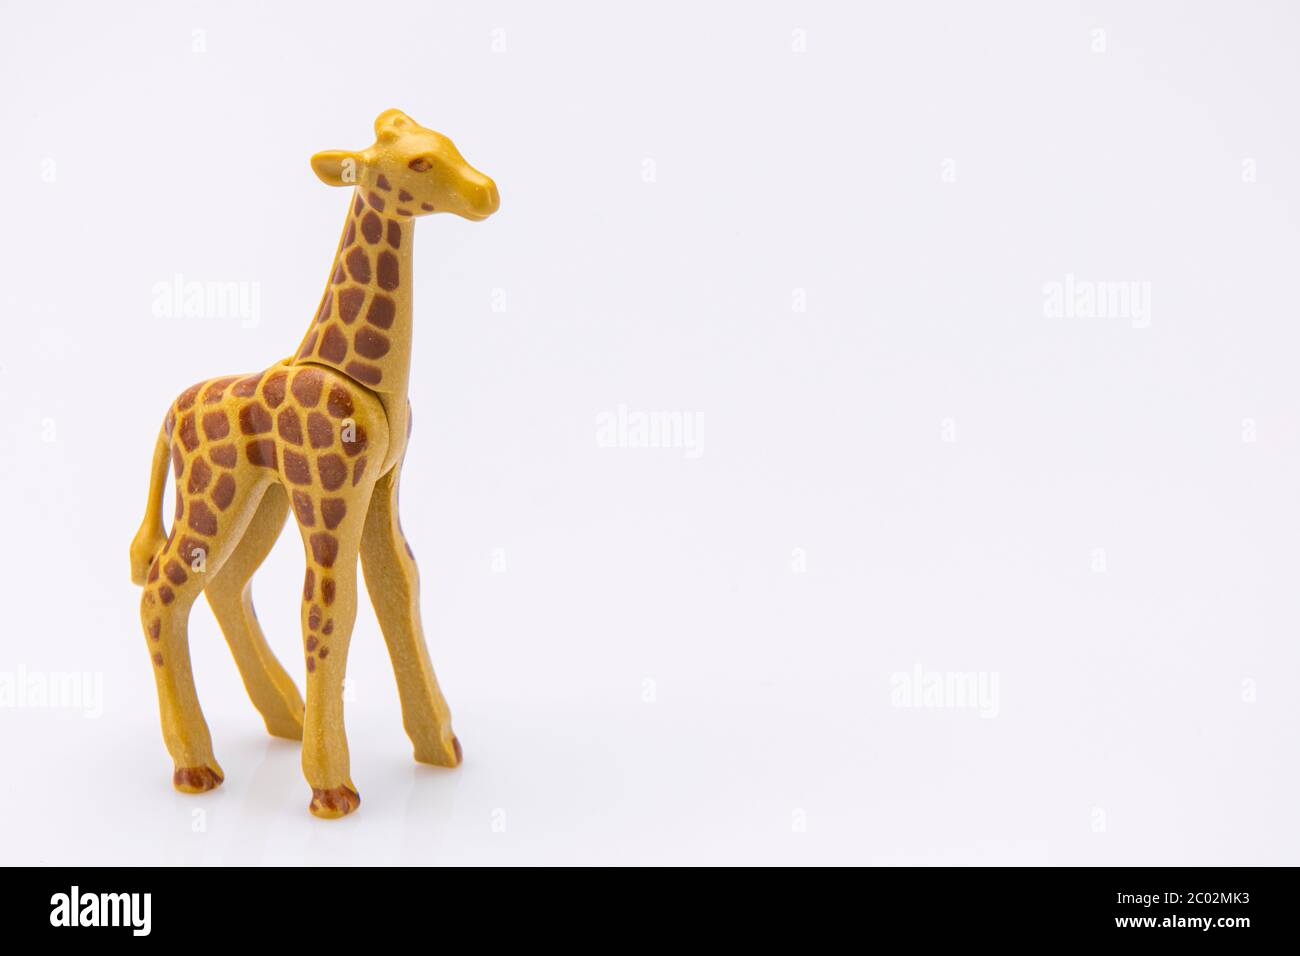 close up of a giraffe from a plastic toy isolated on a white background Stock Photo